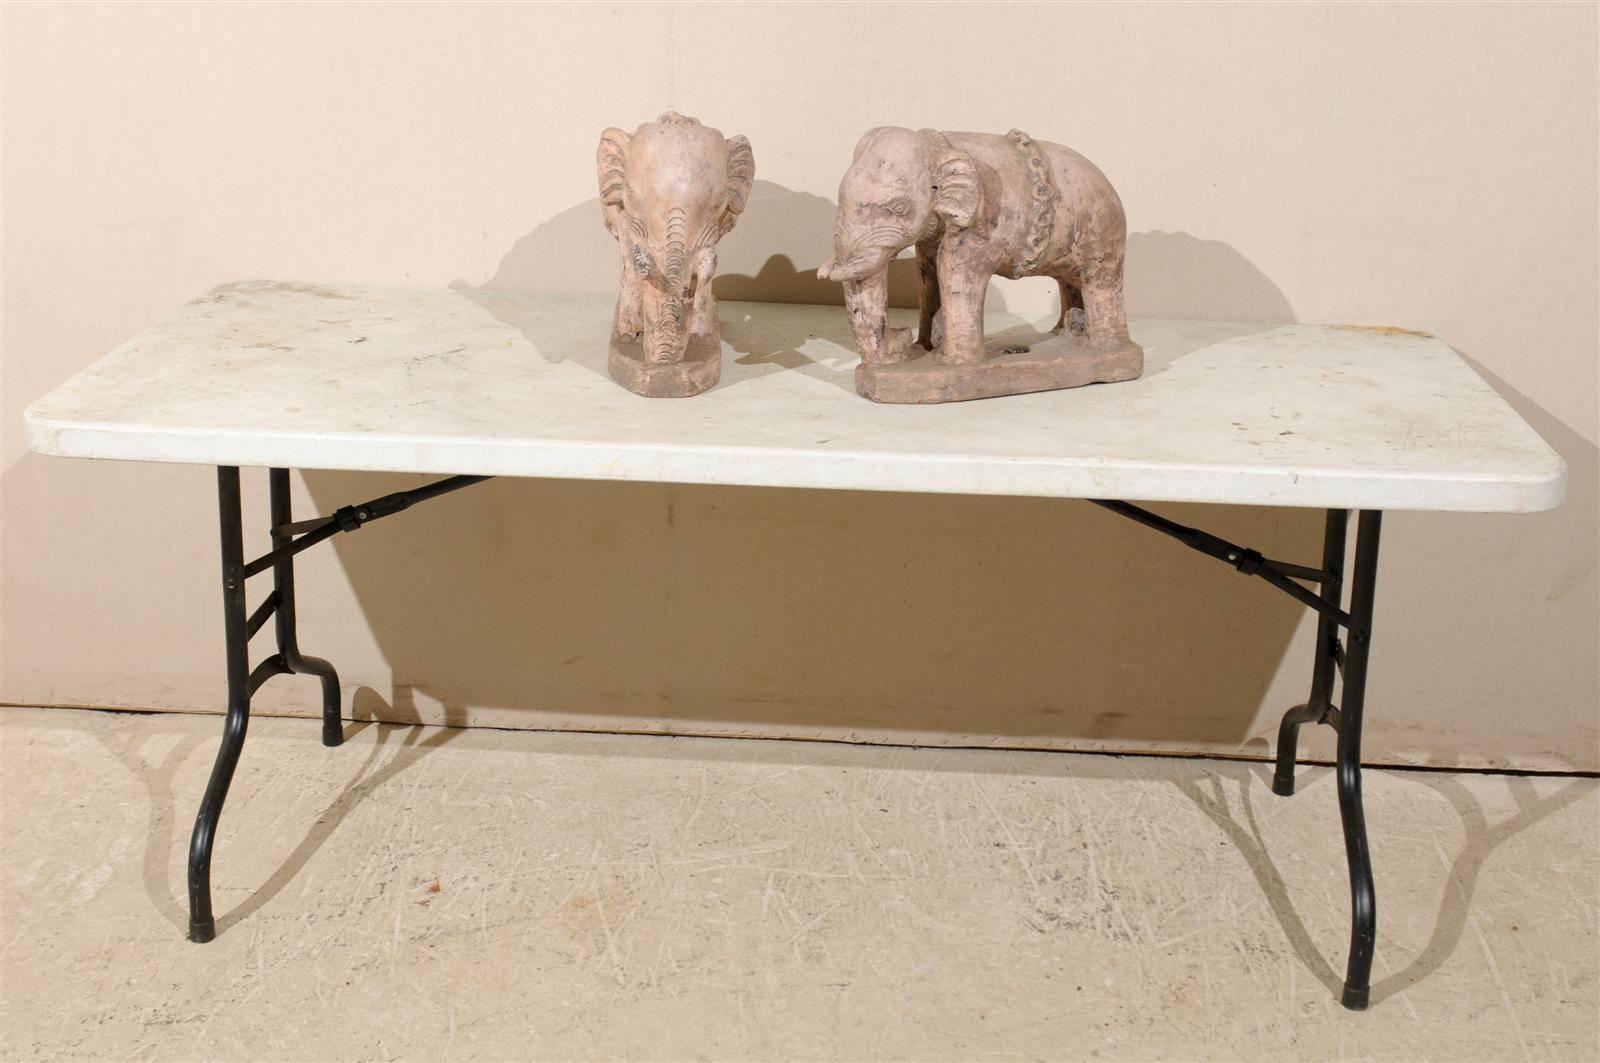 A pair of British colonial terracotta elephants from the early 20th century, India, with nicely rendered details. These eclectic statues have a very subtle, nicely aged, layer of pale pink and beige paint with burnt red and dark rich grey colored